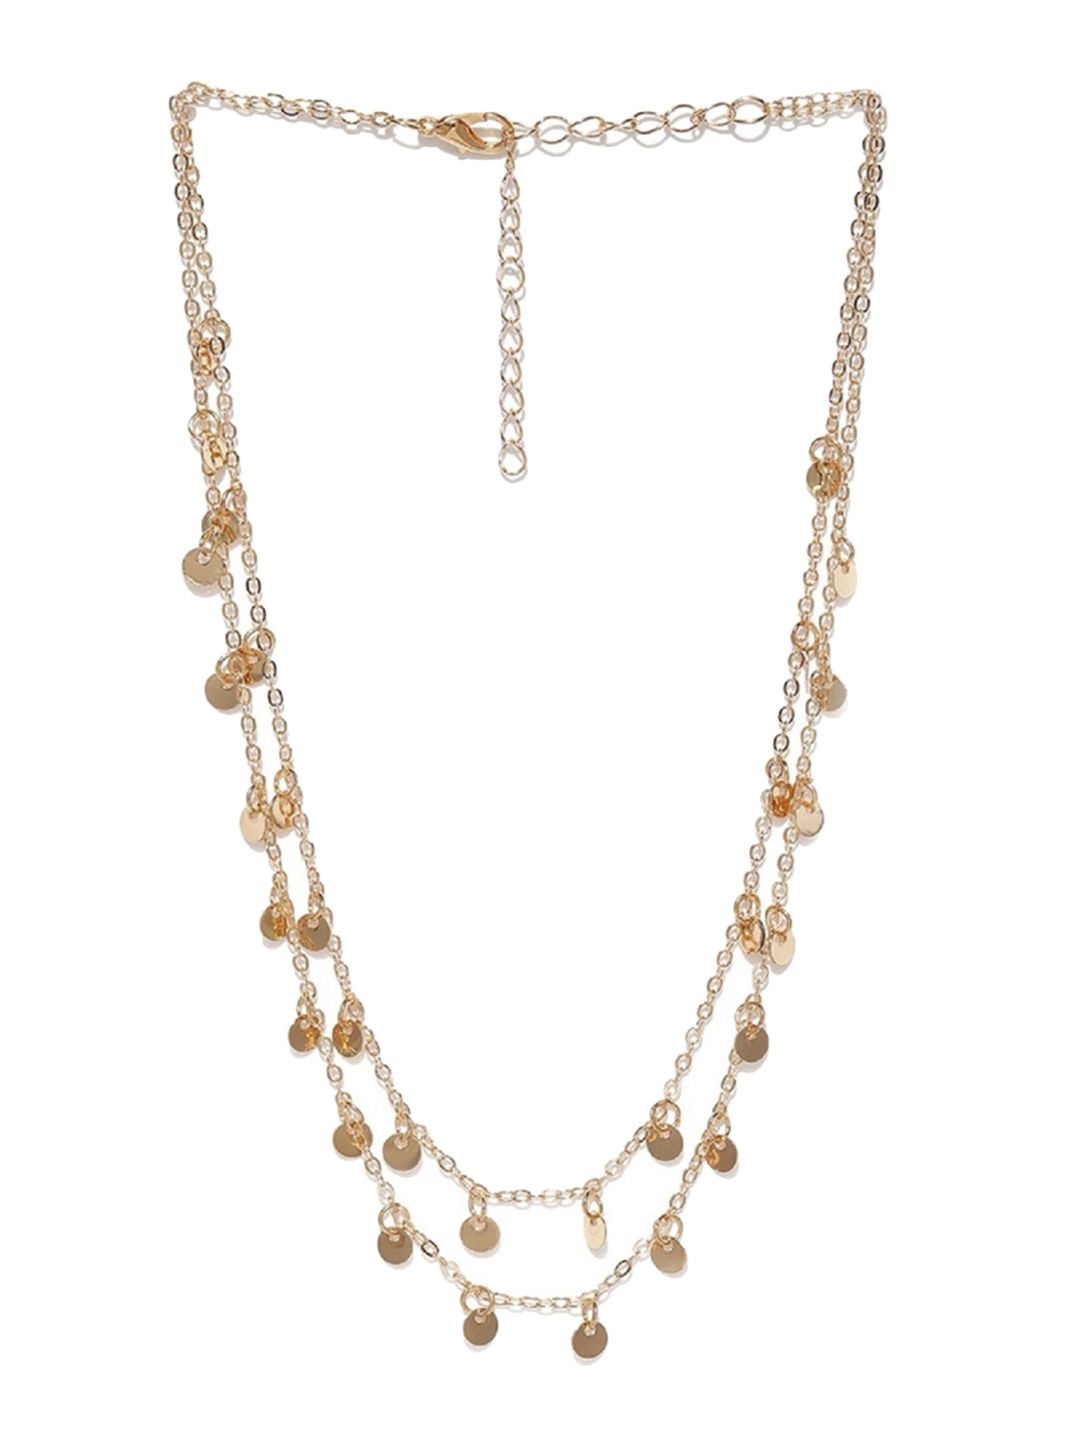 ToniQ Gold-Toned Layered Necklace Price in India